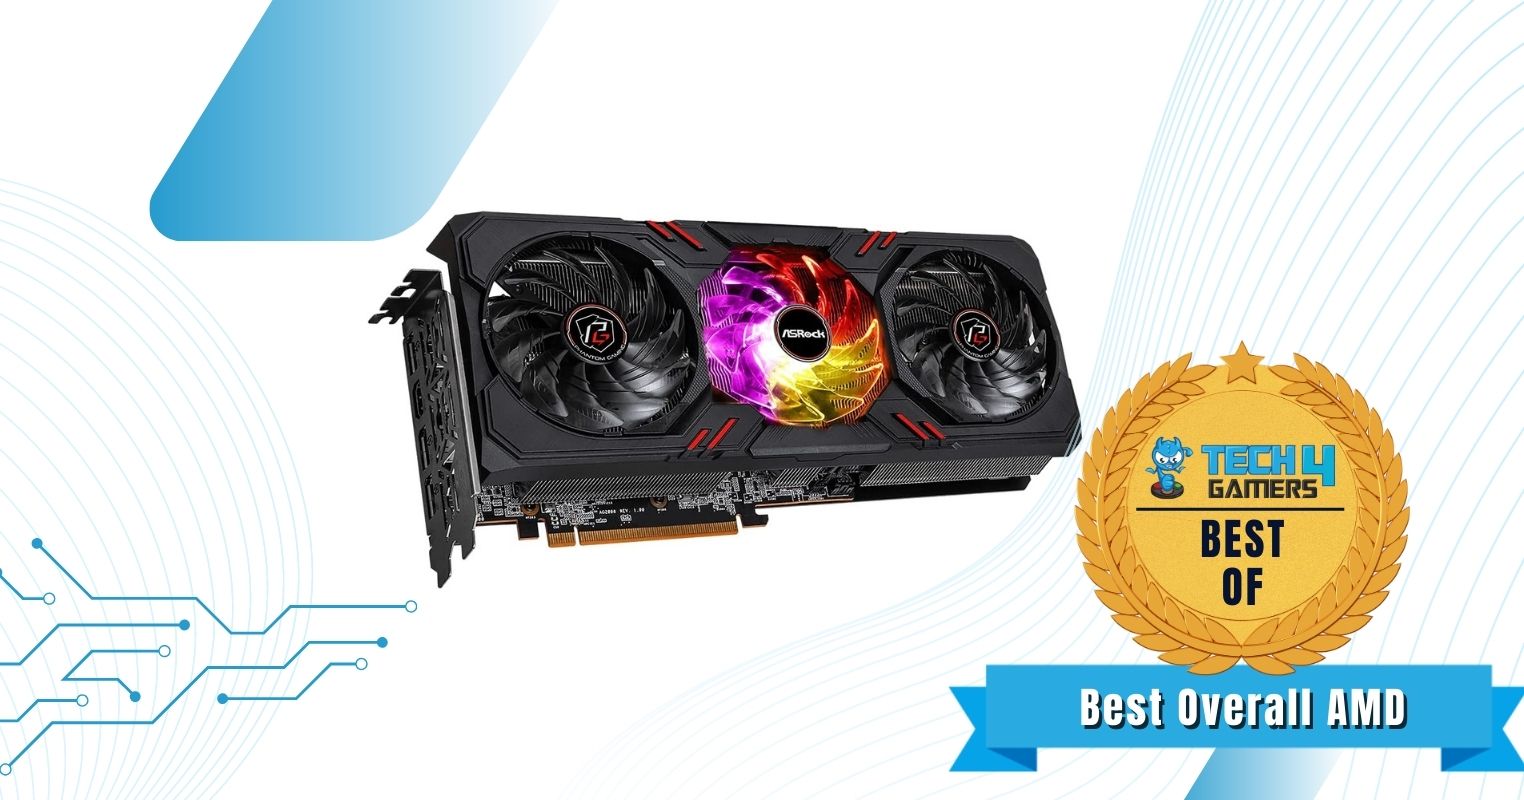 ASRock Phantom Gaming D Radeon RX 6600 XT 8GB - Best Overall AMD Graphics Card for 1080p